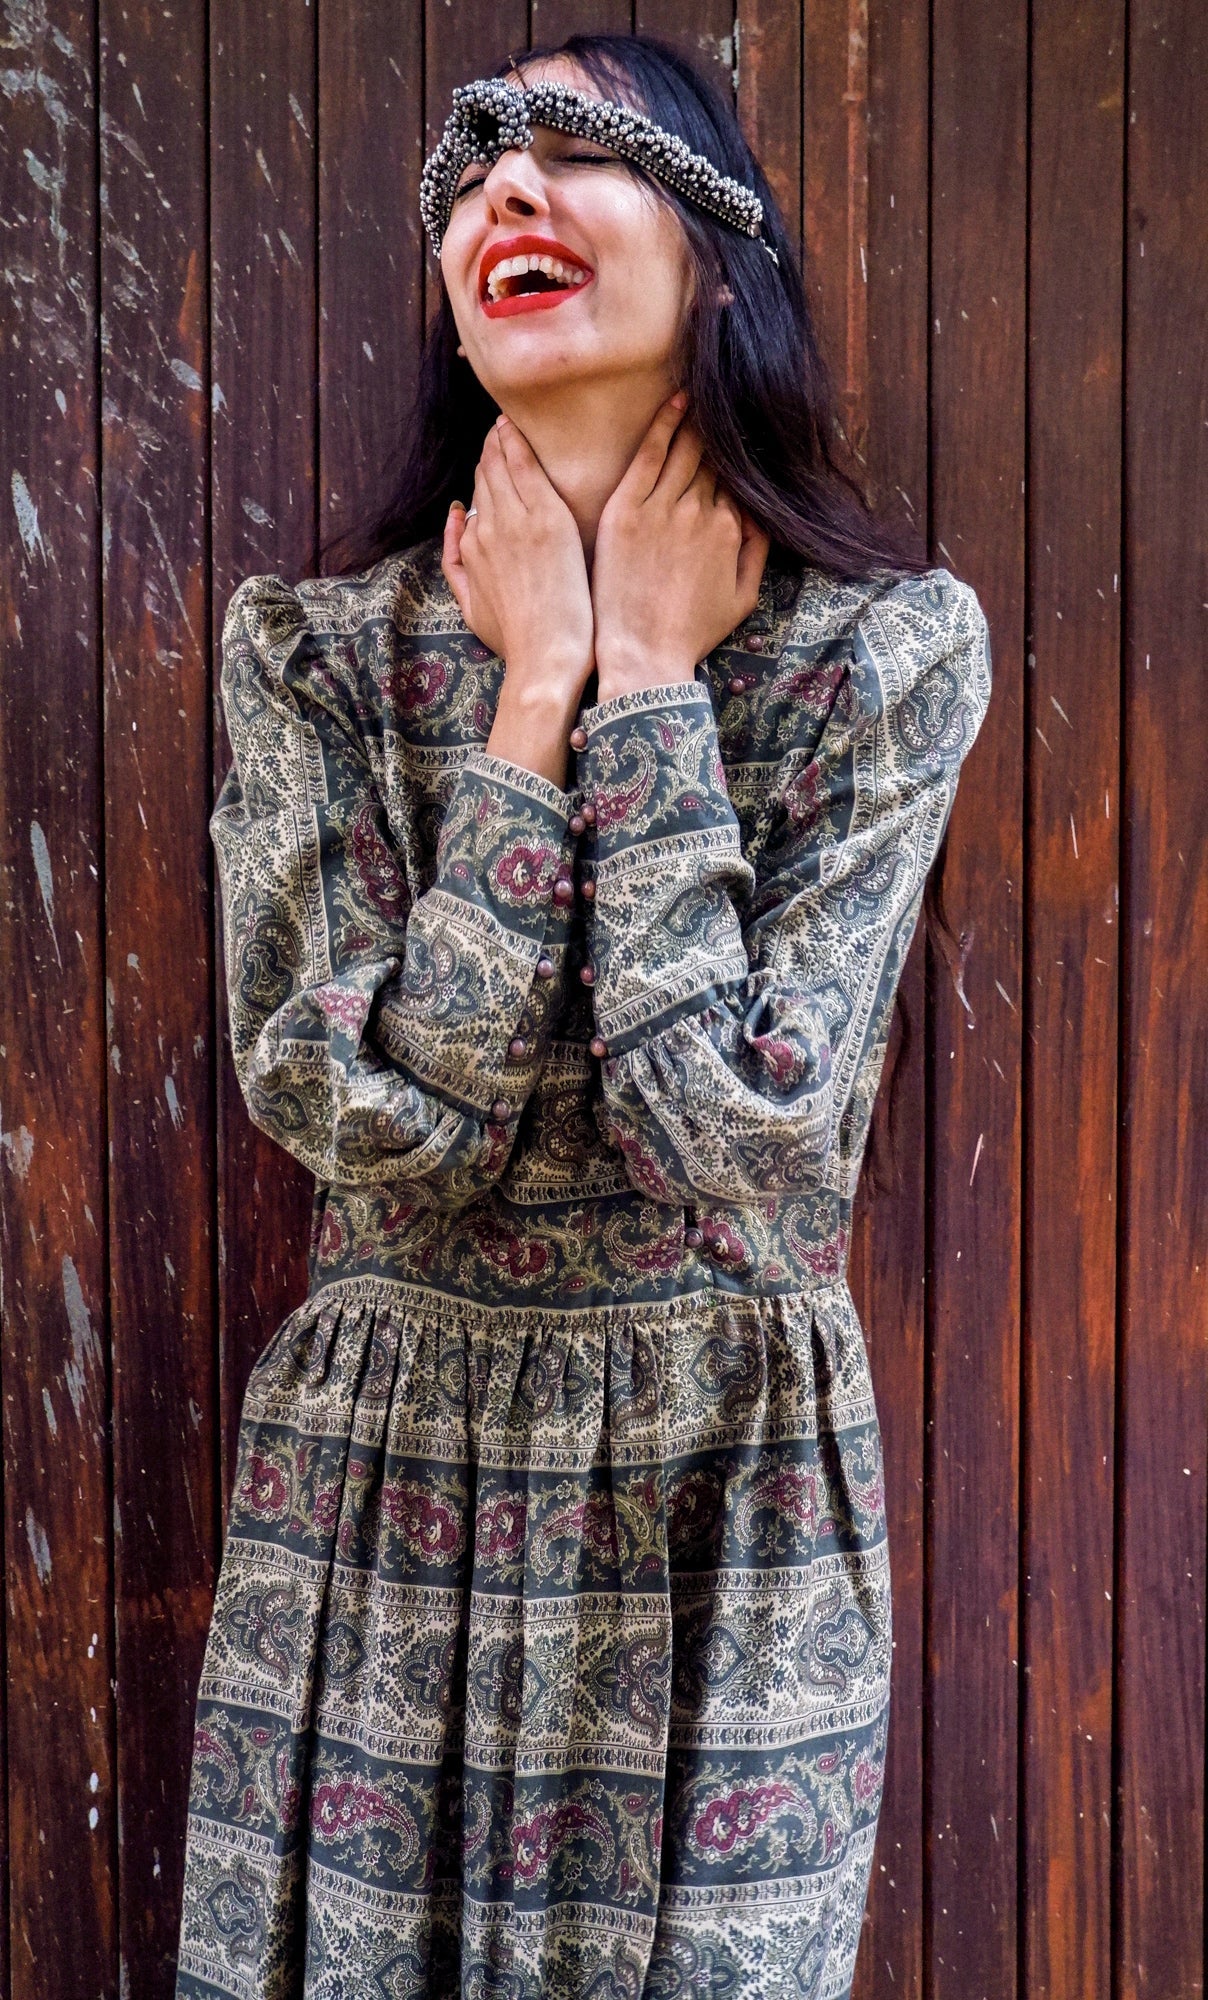 Vintage: 1970s paisley dress by Victor Costa